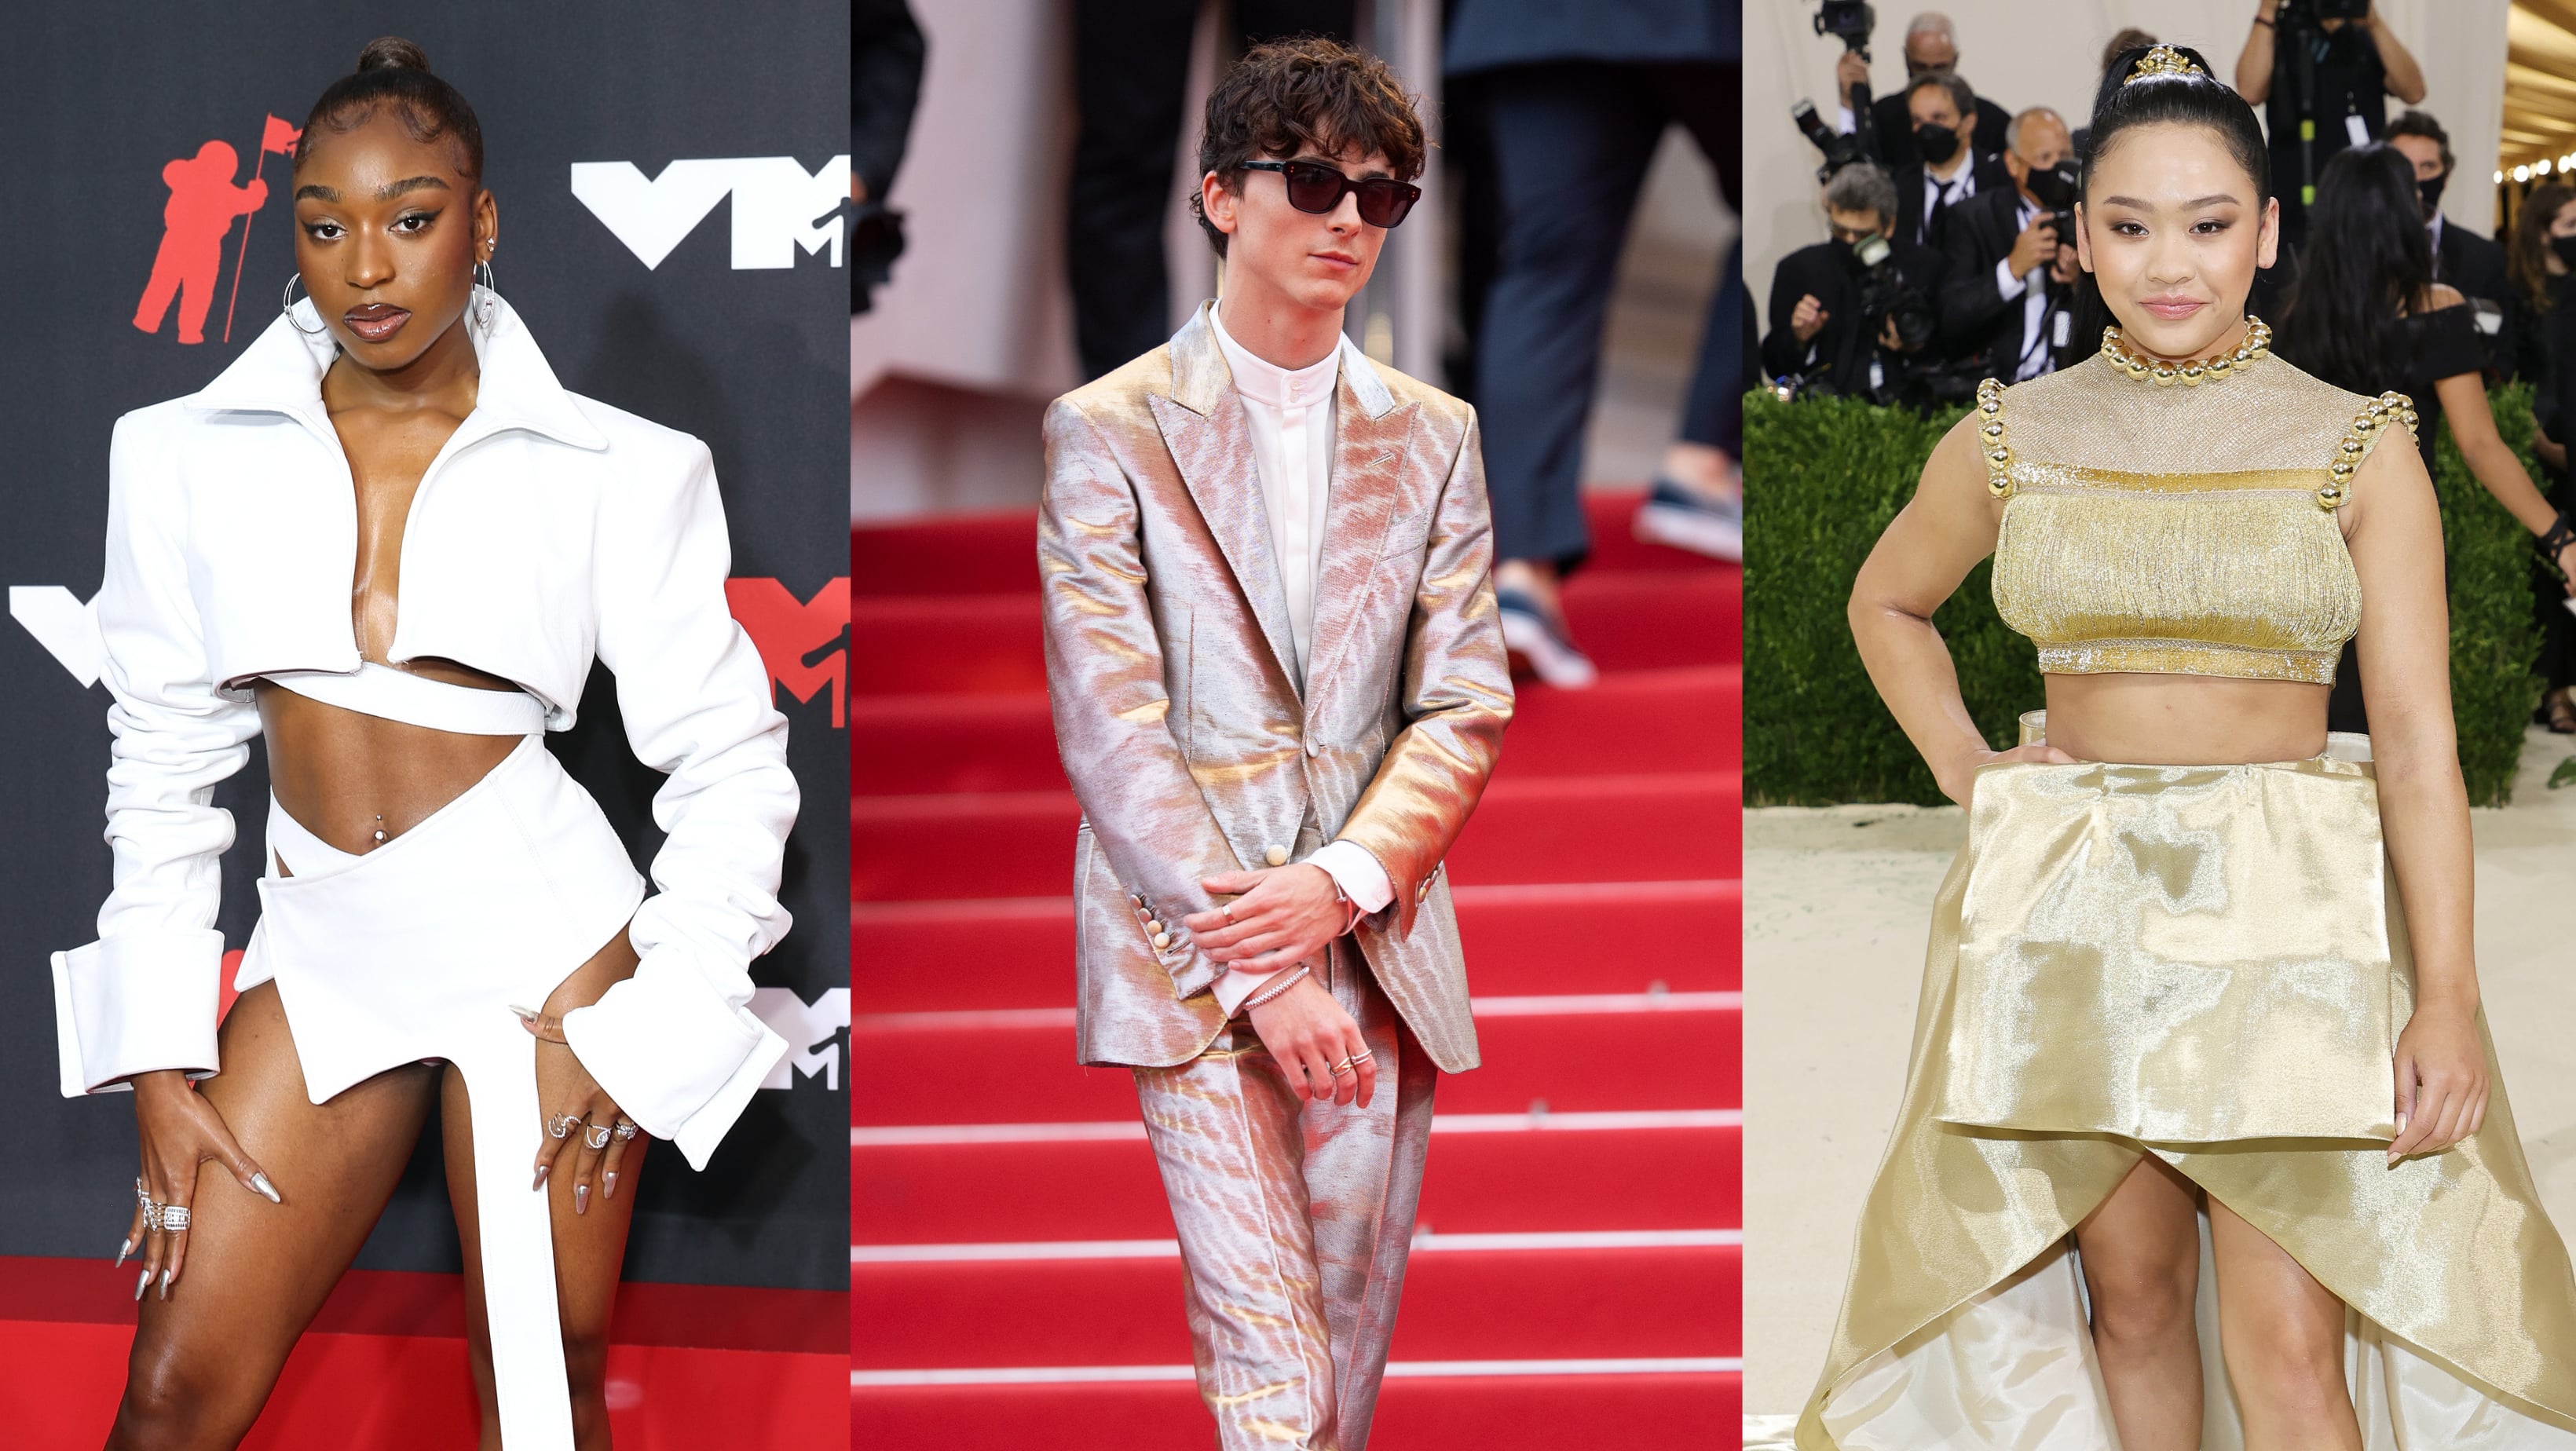 Male harnesses are officially a celebrity fashion trend